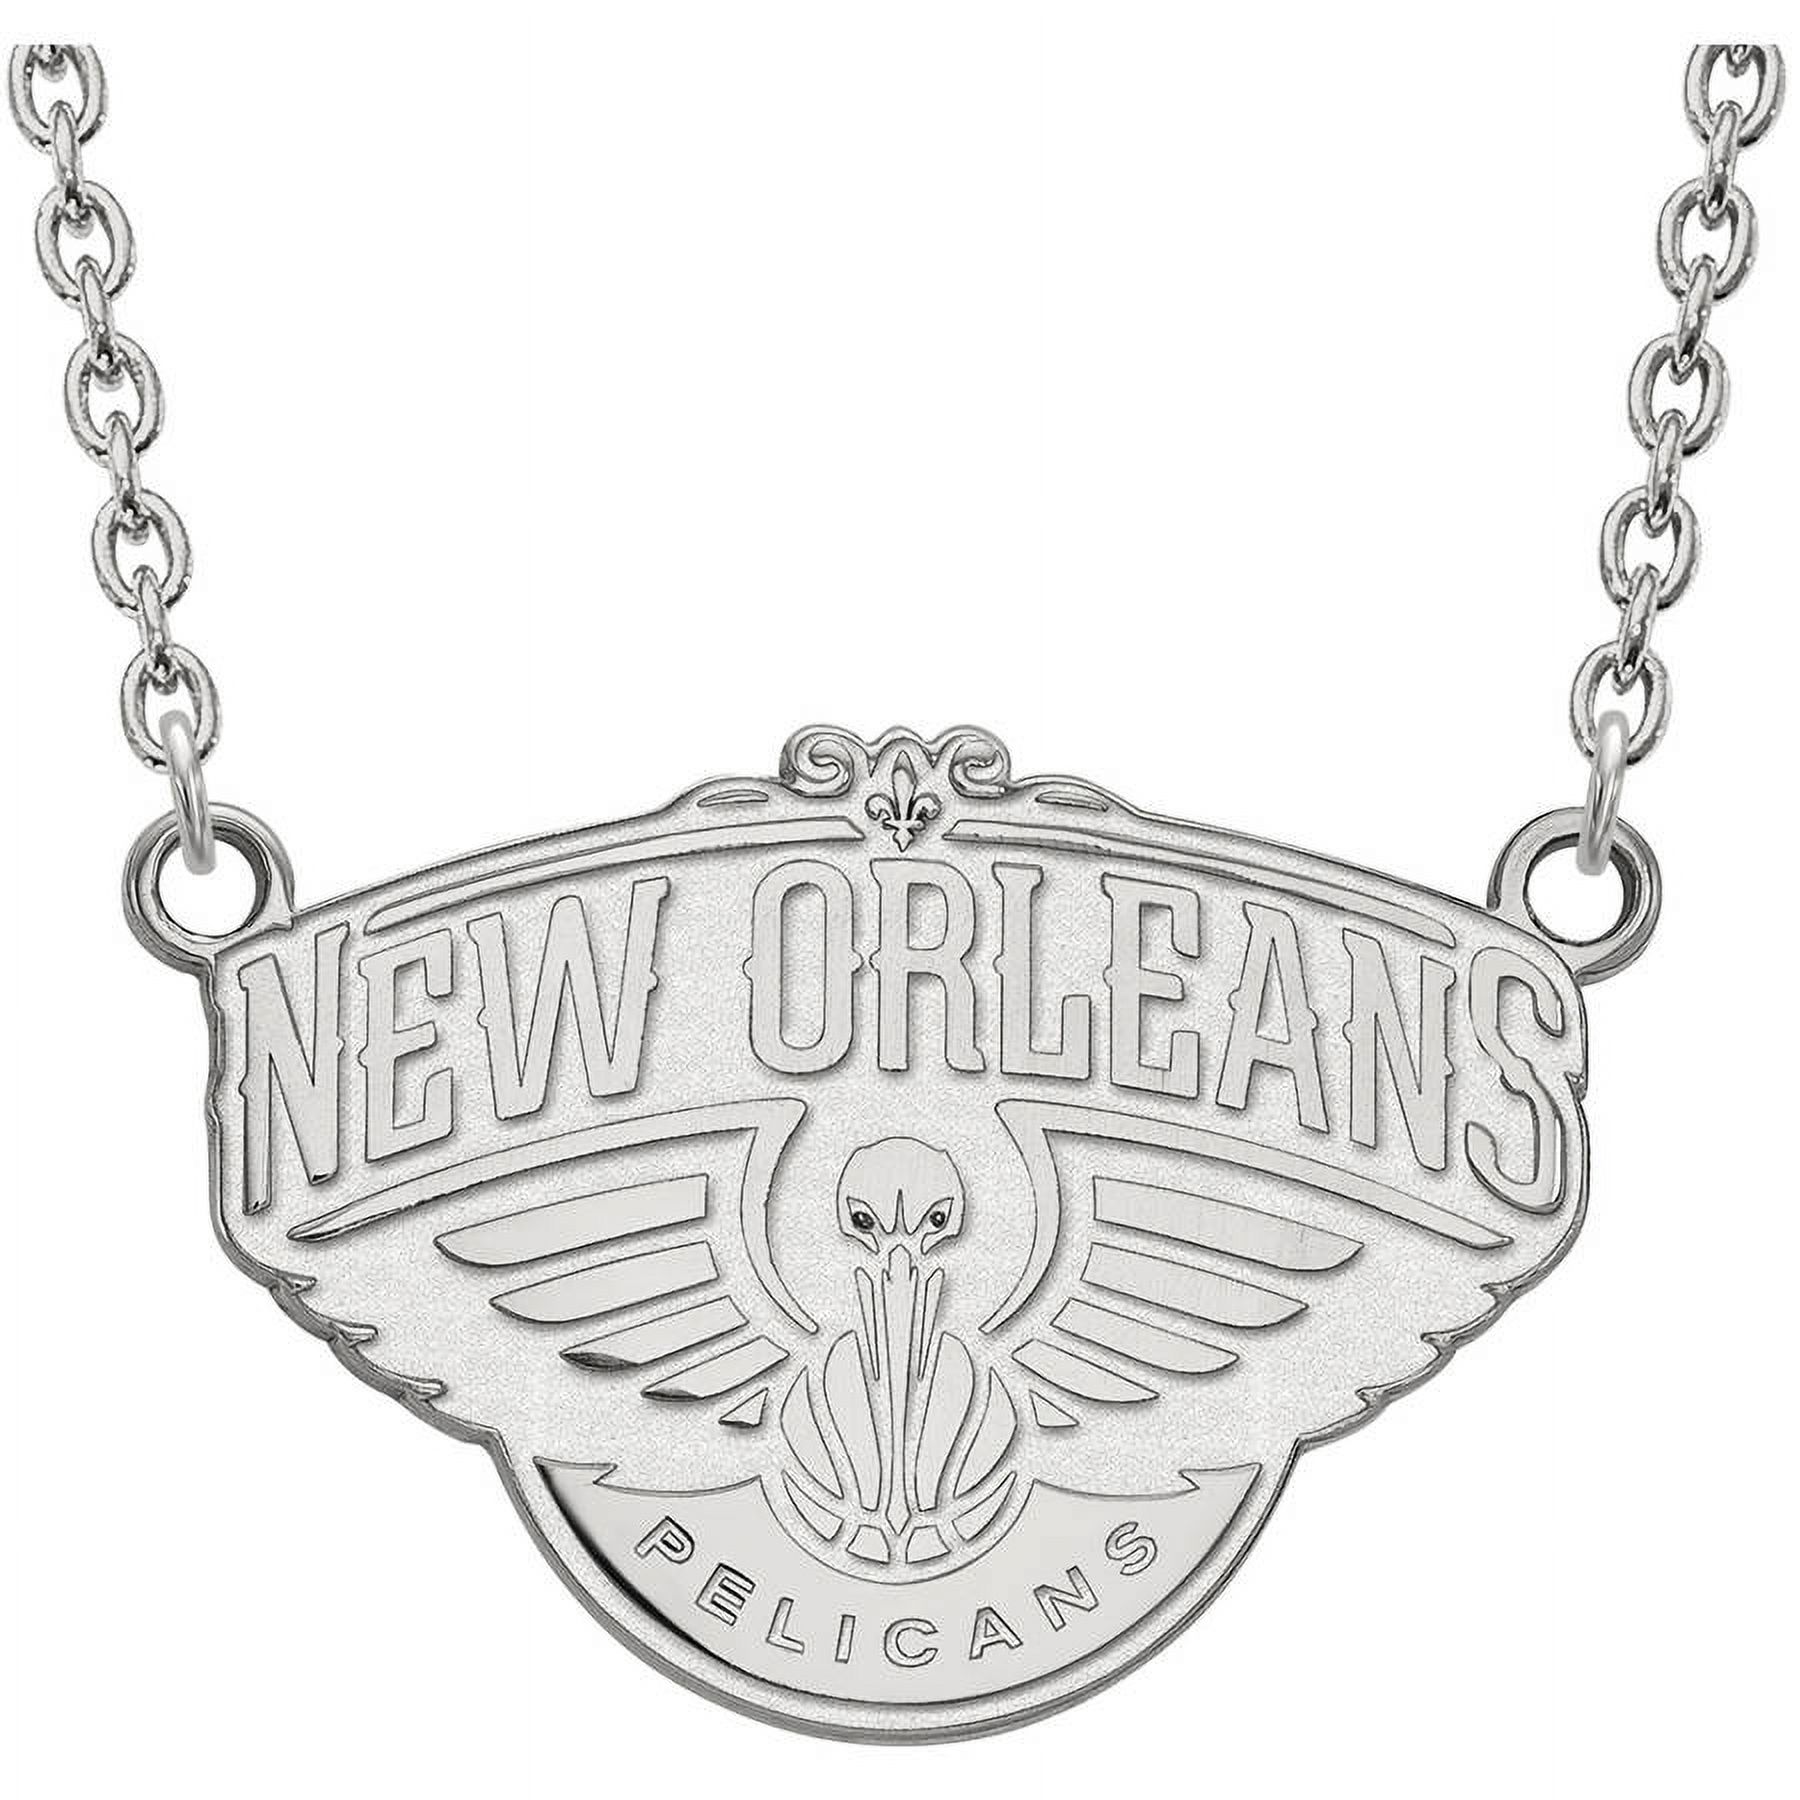 LogoArt 10 Karat White Gold NBA New Orleans Pelicans Pendant with Necklace - image 1 of 5